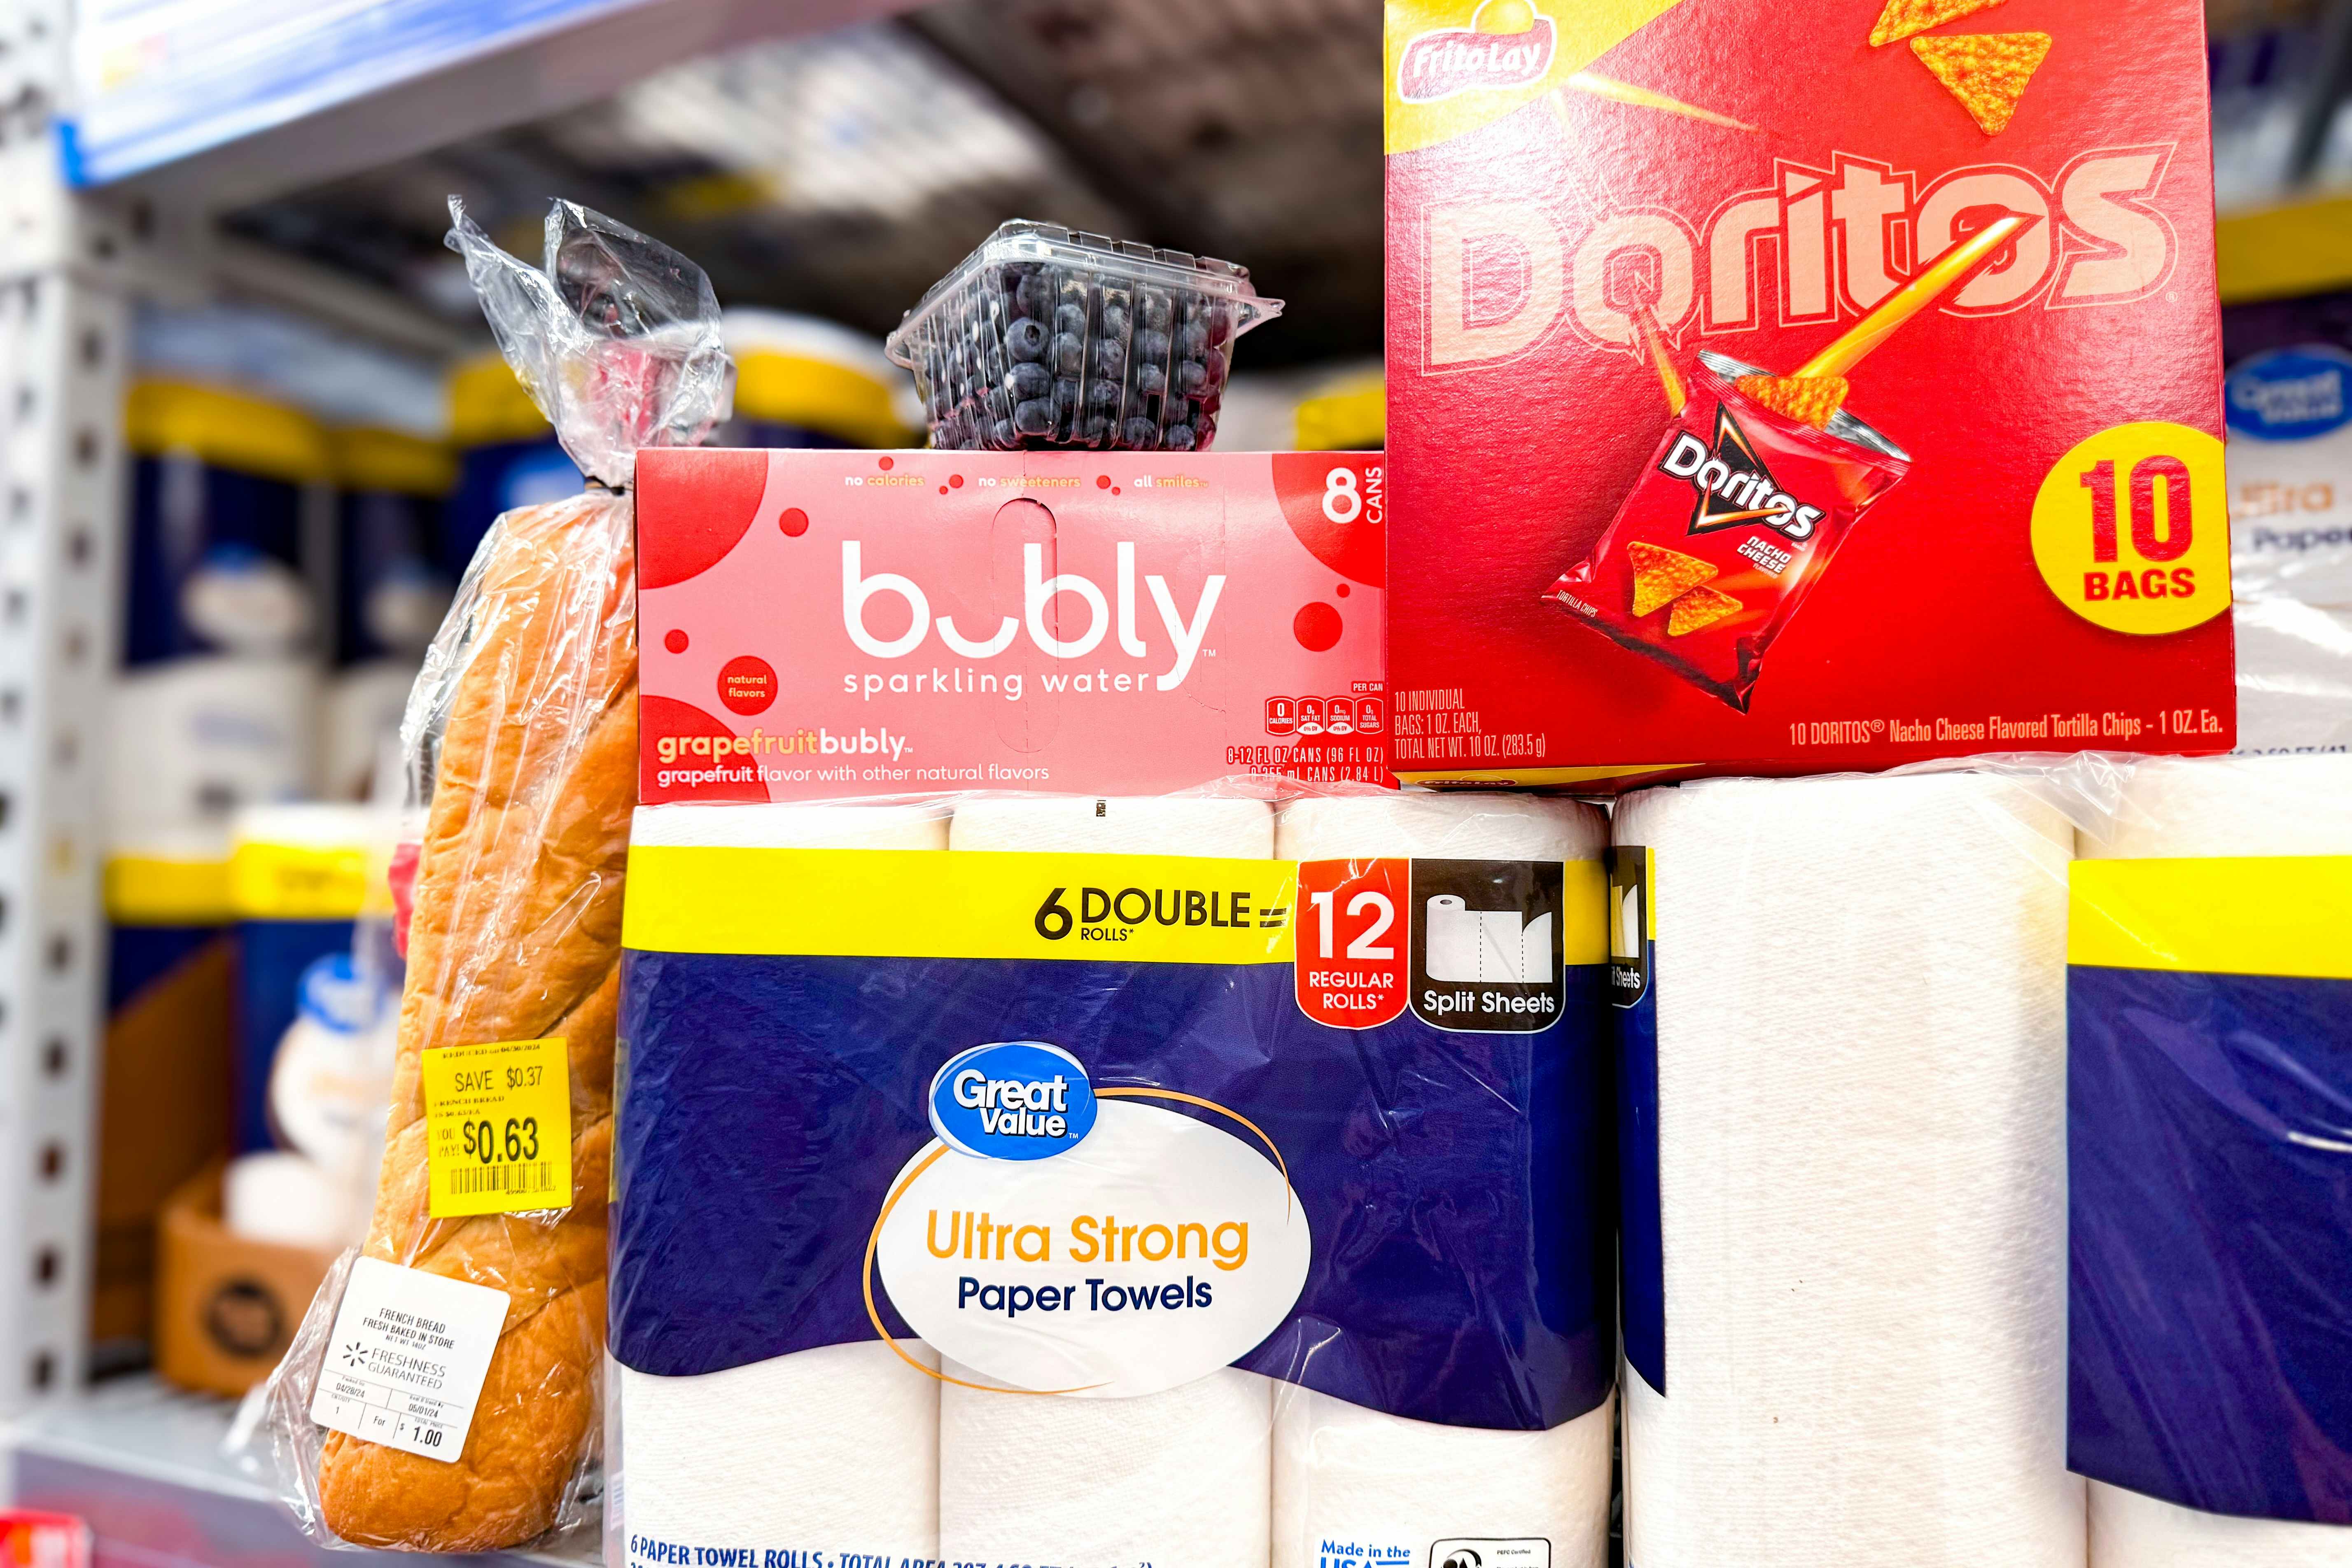 15 Grocery Rollbacks in My Walmart Cart (No Coupons Needed)